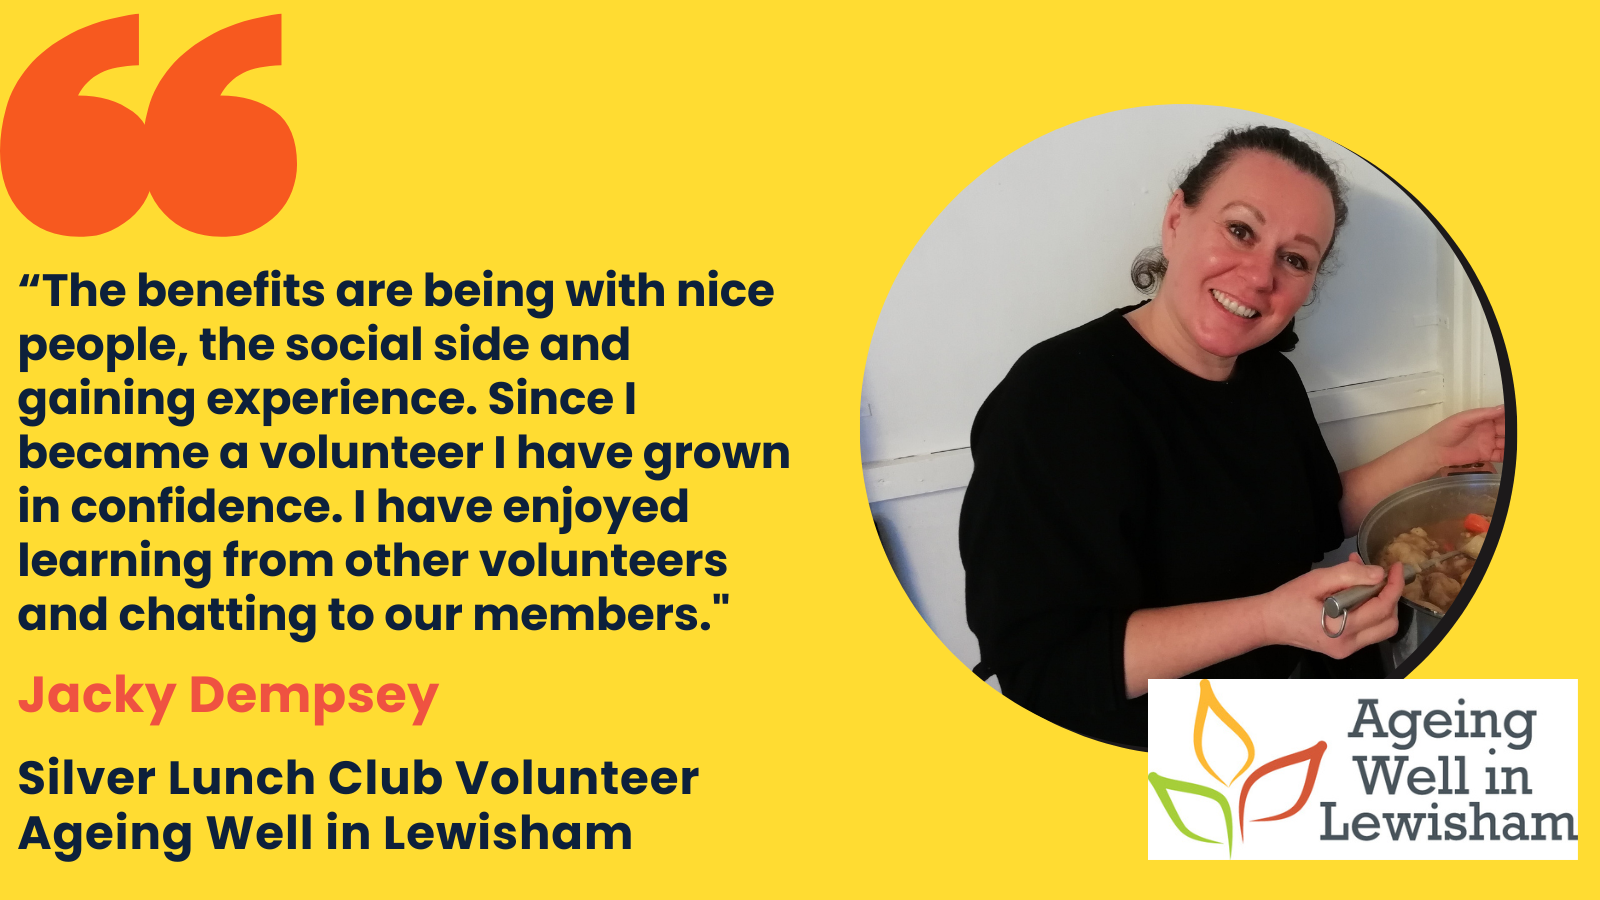 Image with quote from Ageing Well in Lewisham volunteer, Jacky Dempsey. Words of quote "The benefits are being with nice people, the social side and gaining experience. Since I became a volunteer I have grown in confidence. I have enjoyed learning from other volunteers and chatting to our members"